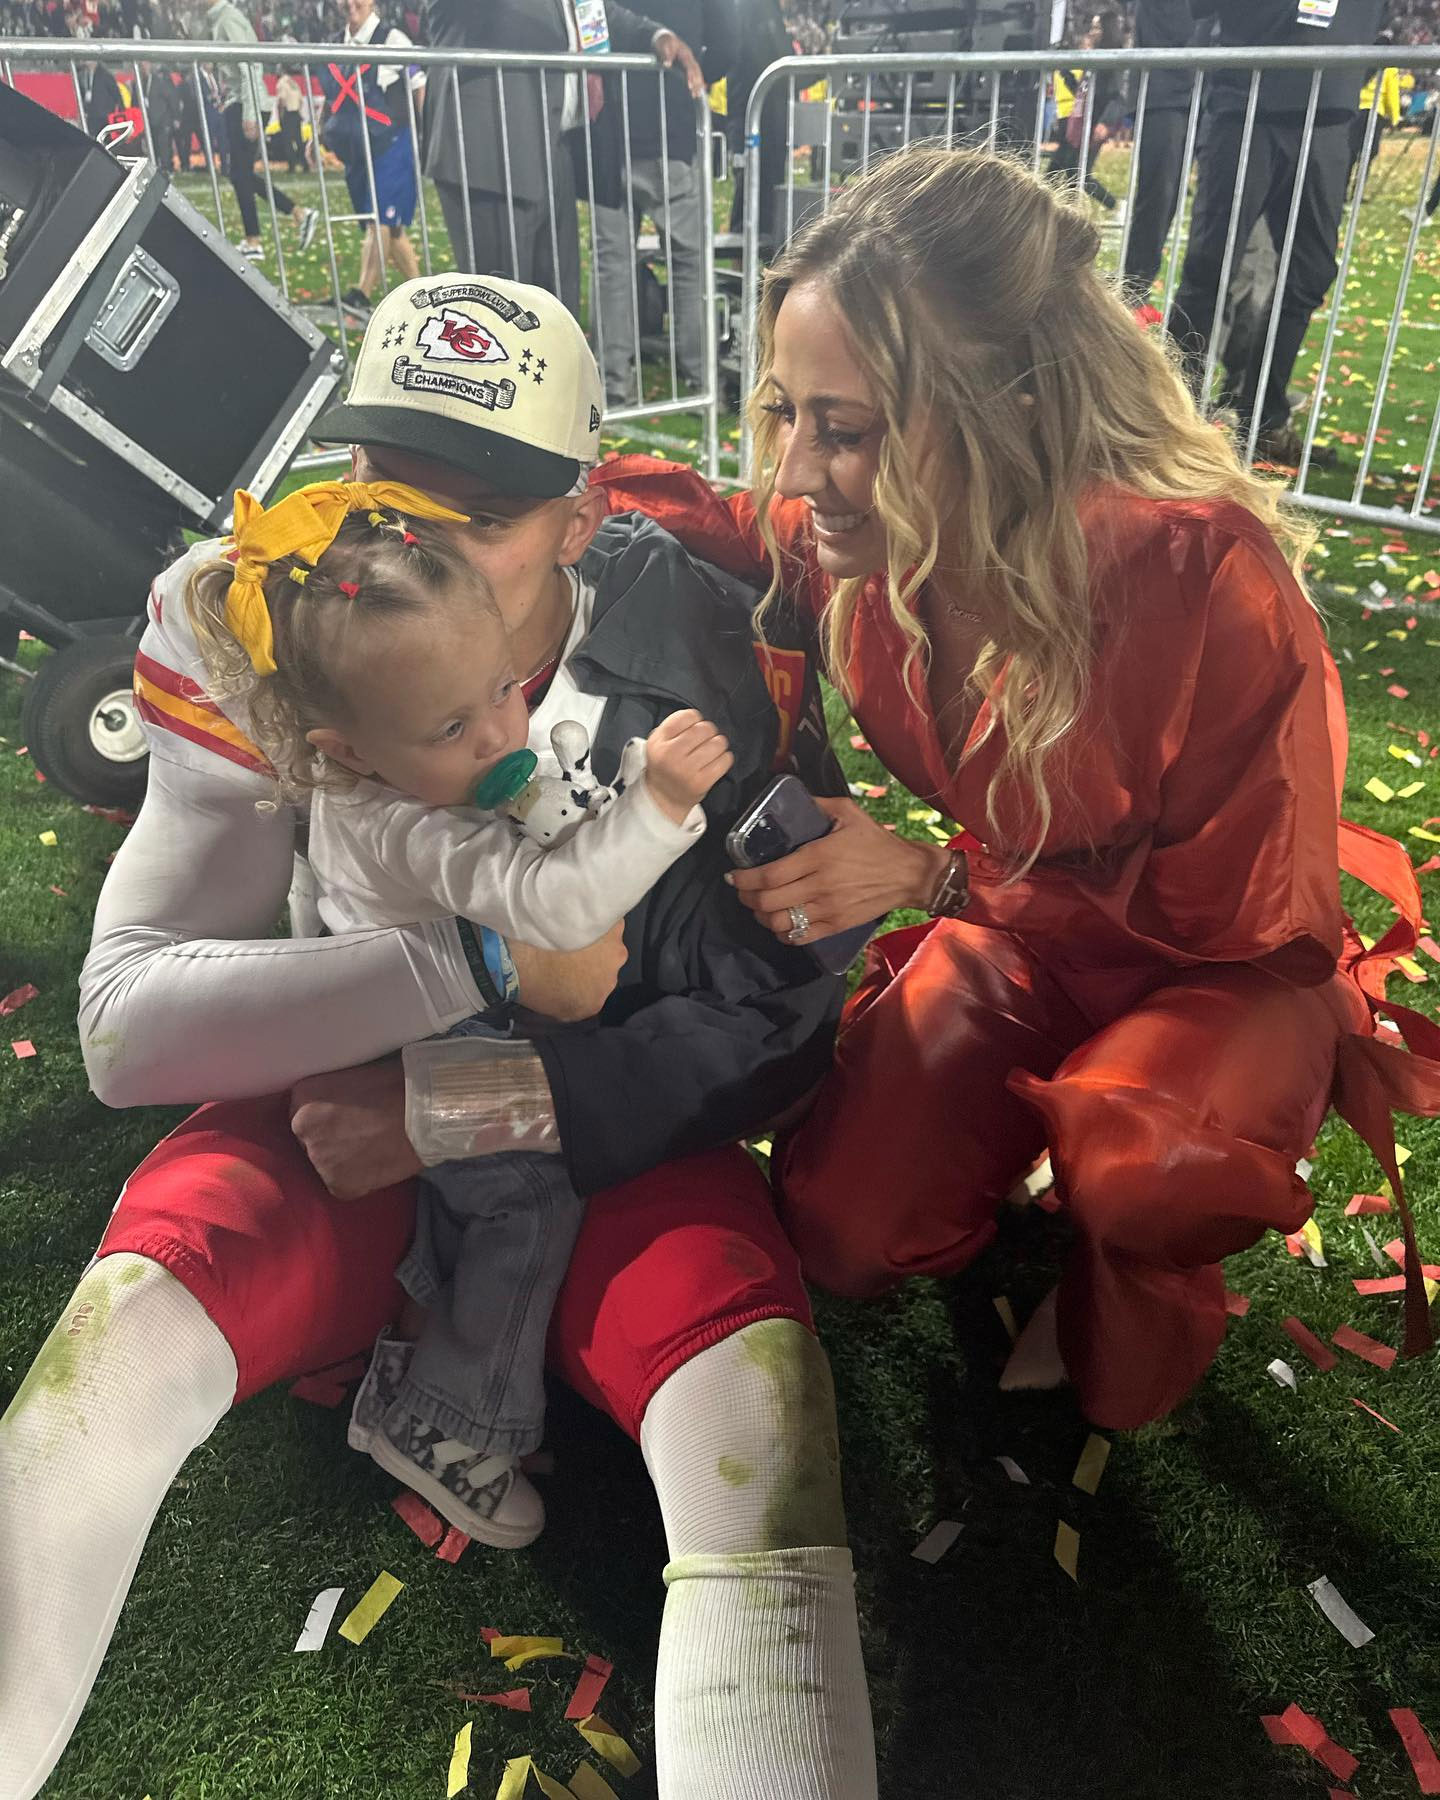 Patrick Mahomes Praises Wife Brittany, Kids in NFL Honors Speech